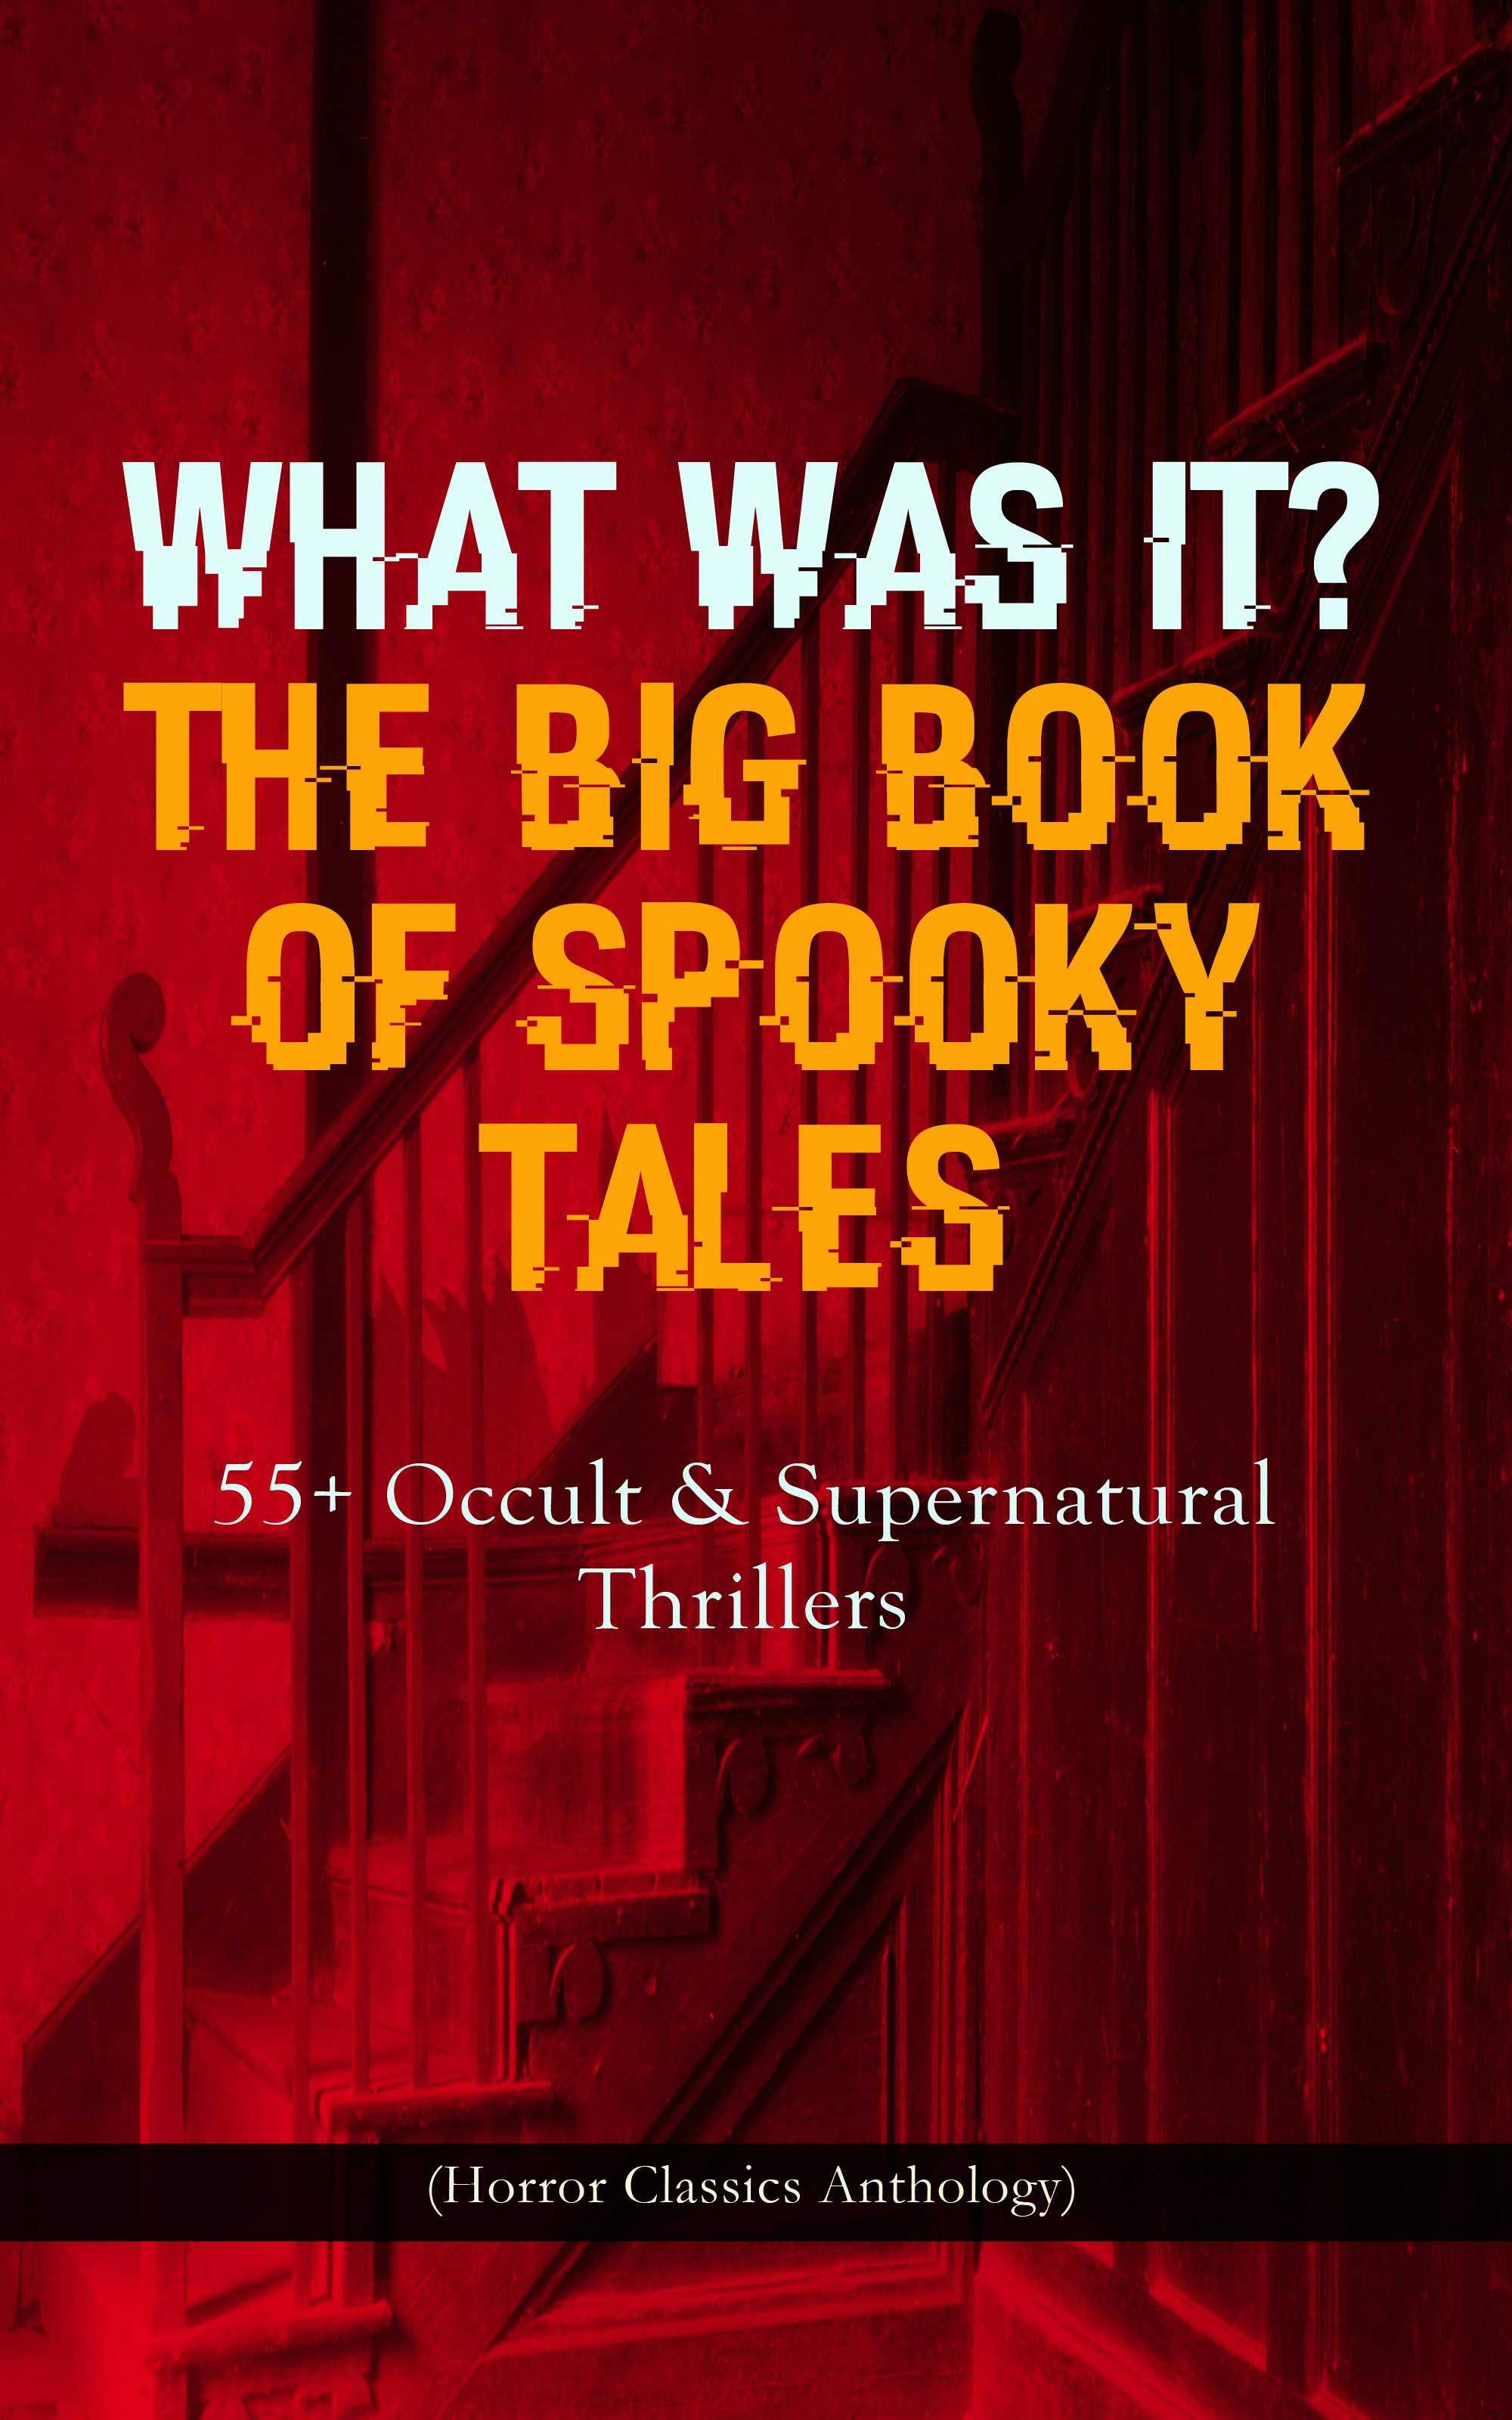 WHAT WAS IT? THE BIG BOOK OF SPOOKY TALES – 55+ Occult & Supernatural Thrillers (Horror Classics Anthology): Number 13, The Deserted House, The Man with the Pale Eyes, The Oblong Box, The Birth-Mark, A Terribly Strange Bed, The Torture by Hope, The Mysterious Card and many more - Joseph L. French, W. F. Harvey, Nathaniel Hawthorne, F. Marryat, Pliny the Younger, Lafcadio Hearn, C. Moffett, R. L. Stevenson, Théopile Gautier, Wilkie Collins, Guy de Maupassant, Villiers Adam, Fitz-James O'Brien, Edgar Allan Poe, M. R. James, Katherine Rickford, Brander Matthews, Margaret Oliphant, William Archer, C. B. Fernando